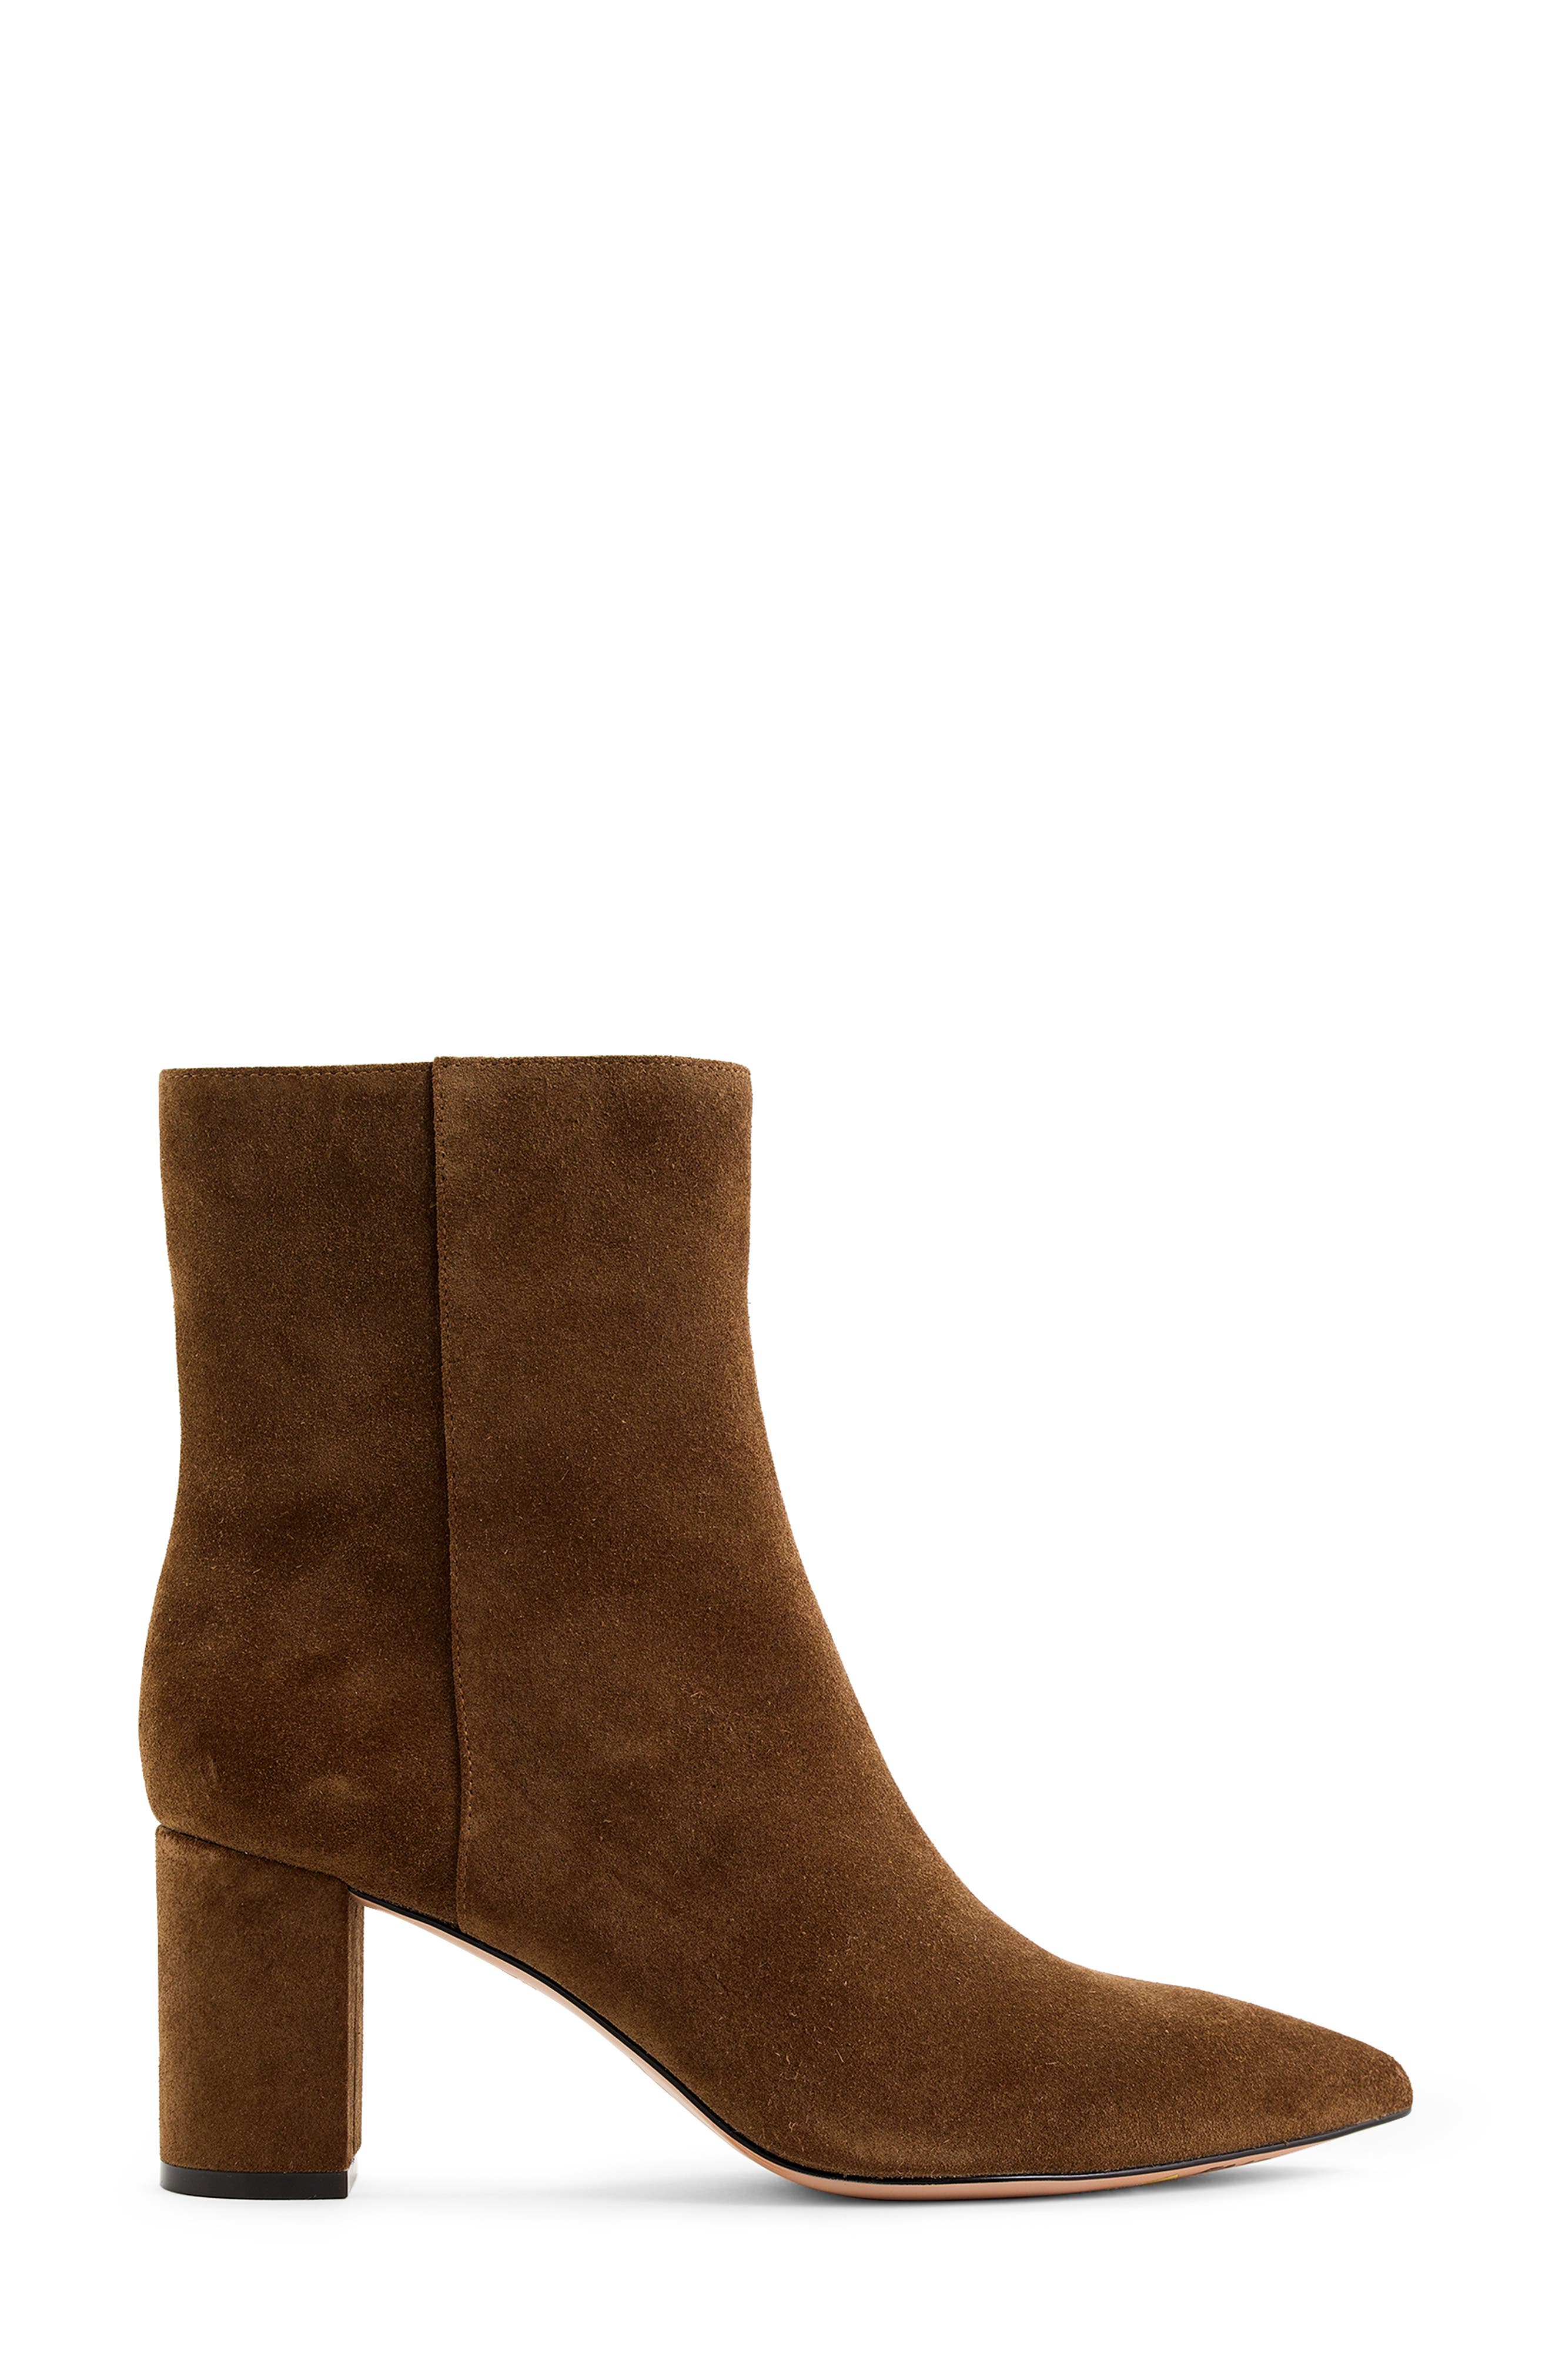 j crew pointed stiletto ankle boots